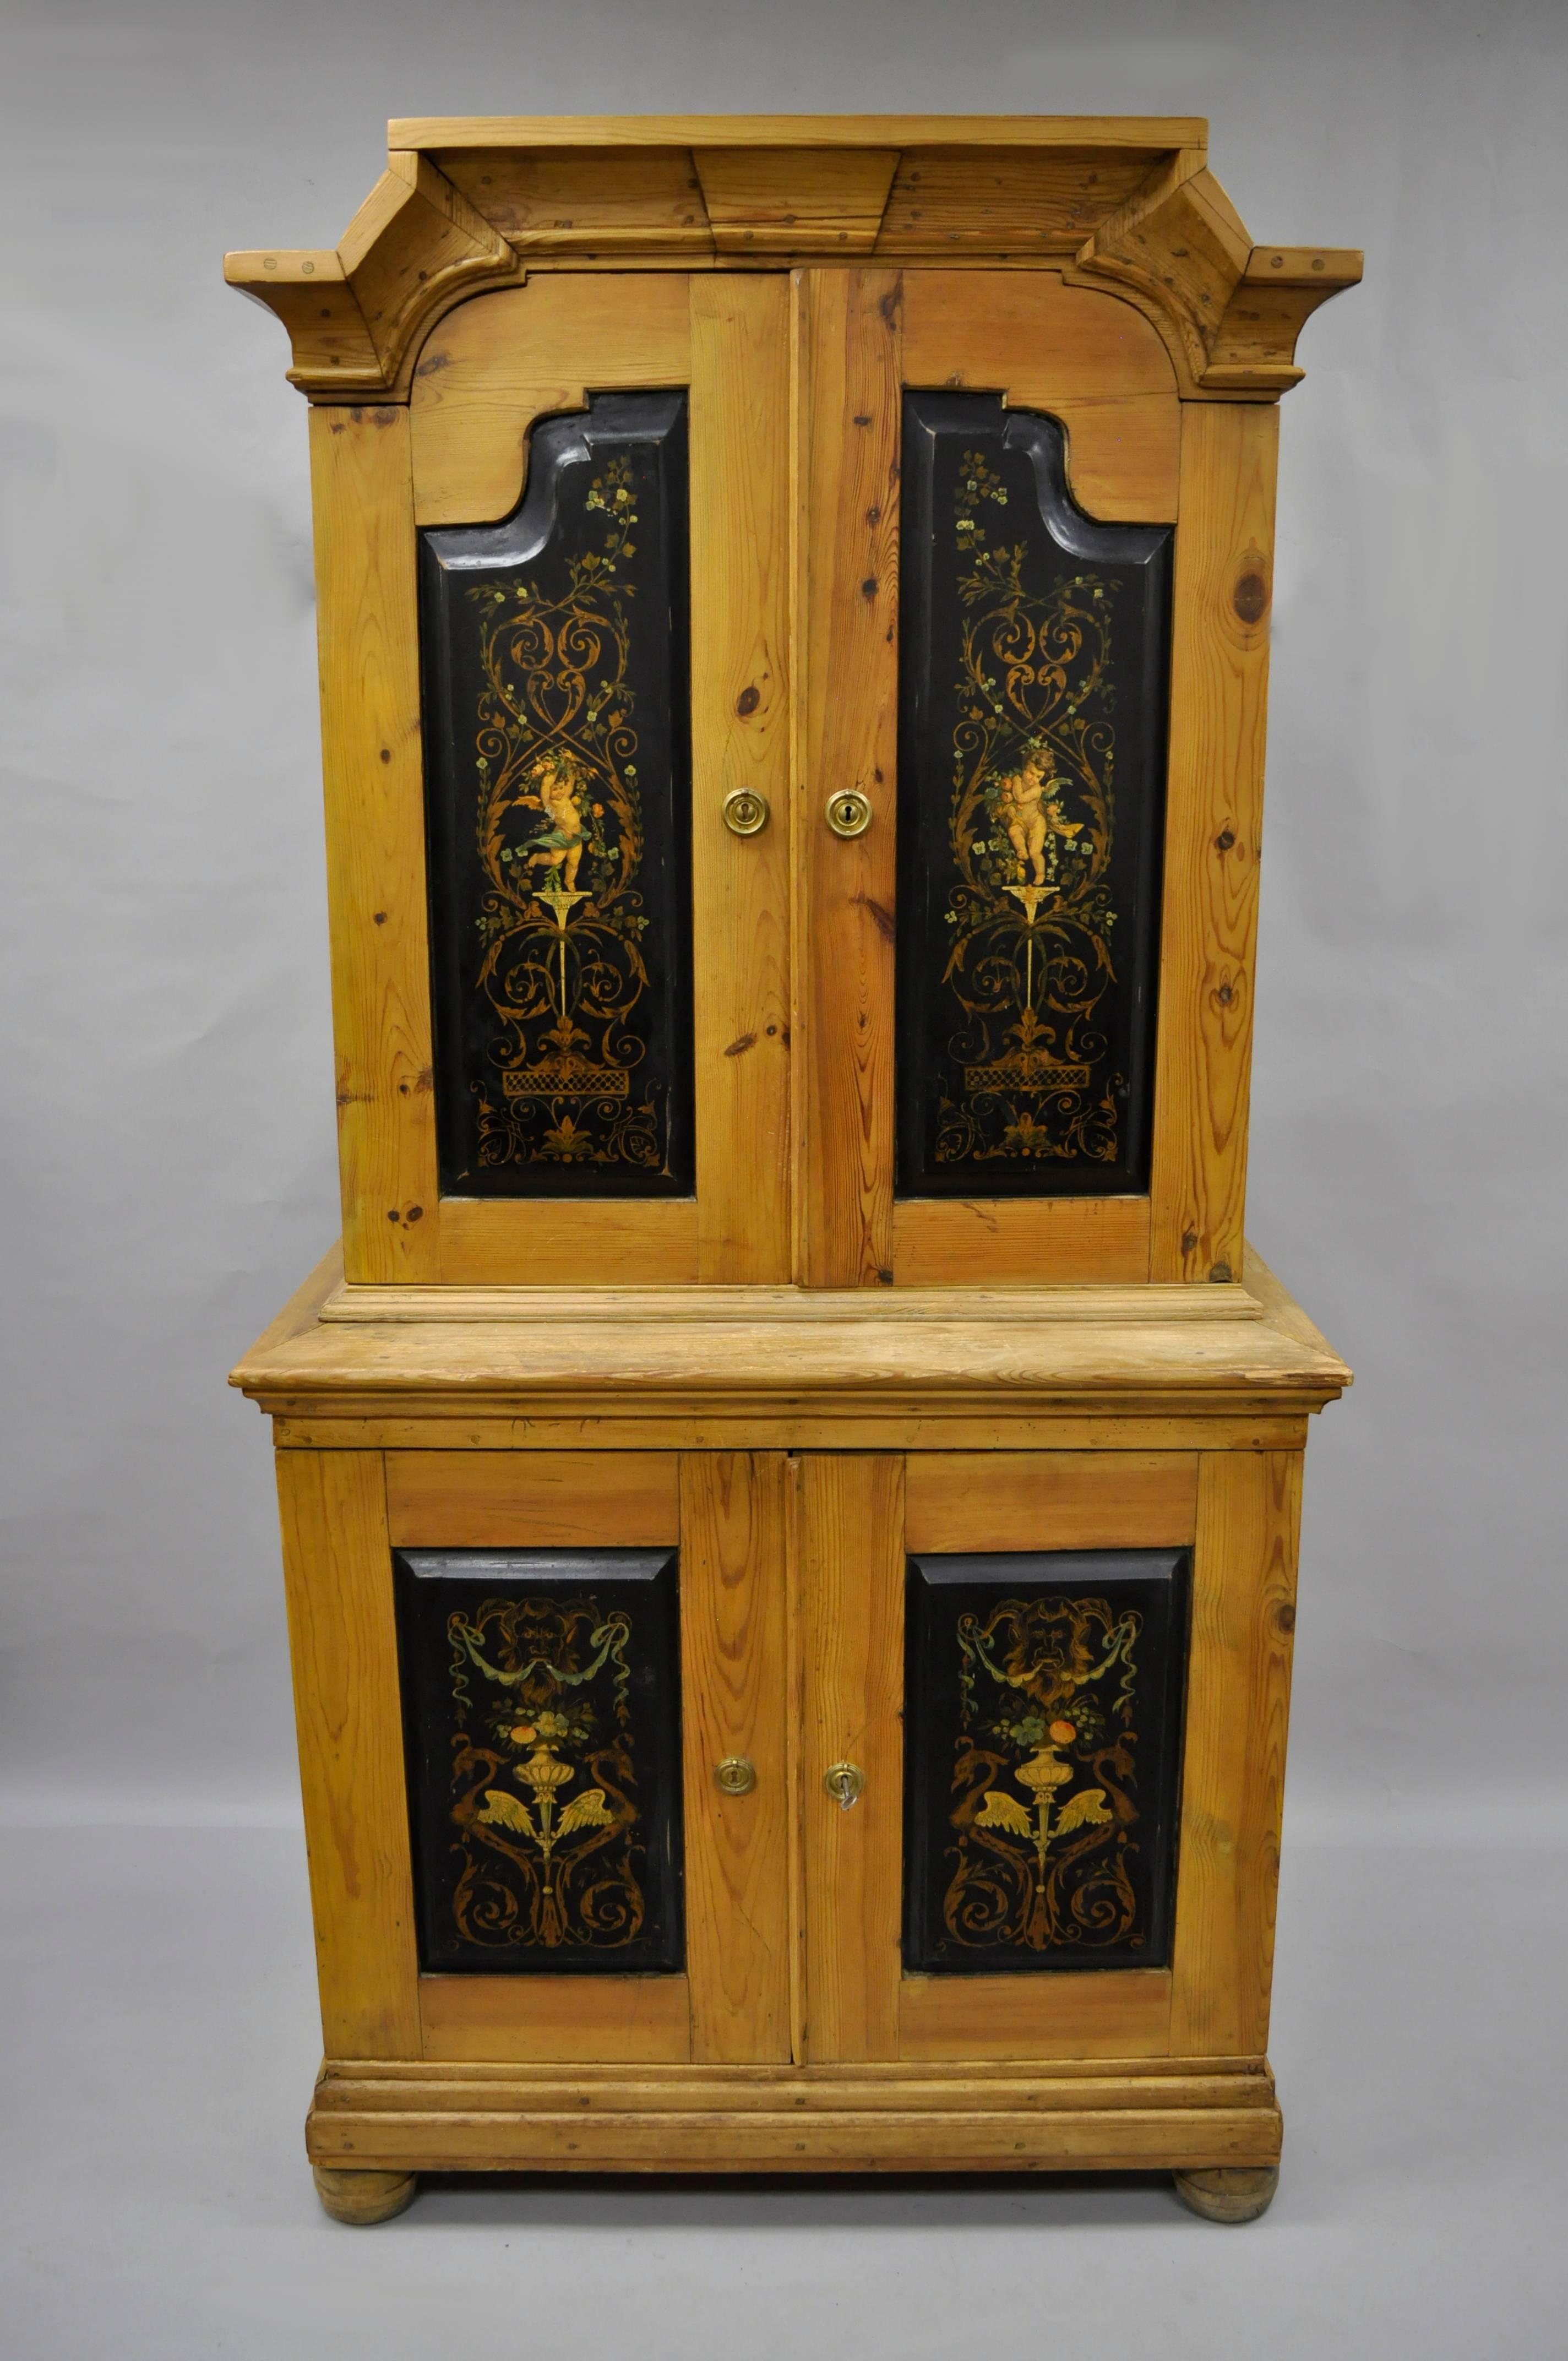 Primitive French Country neoclassical style cherub painted pine wood cabinet. Item features a distressed solid pine wood two part construction, four swing cabinet doors with hand-painted black panels. The upper doors feature dancing cherubs and